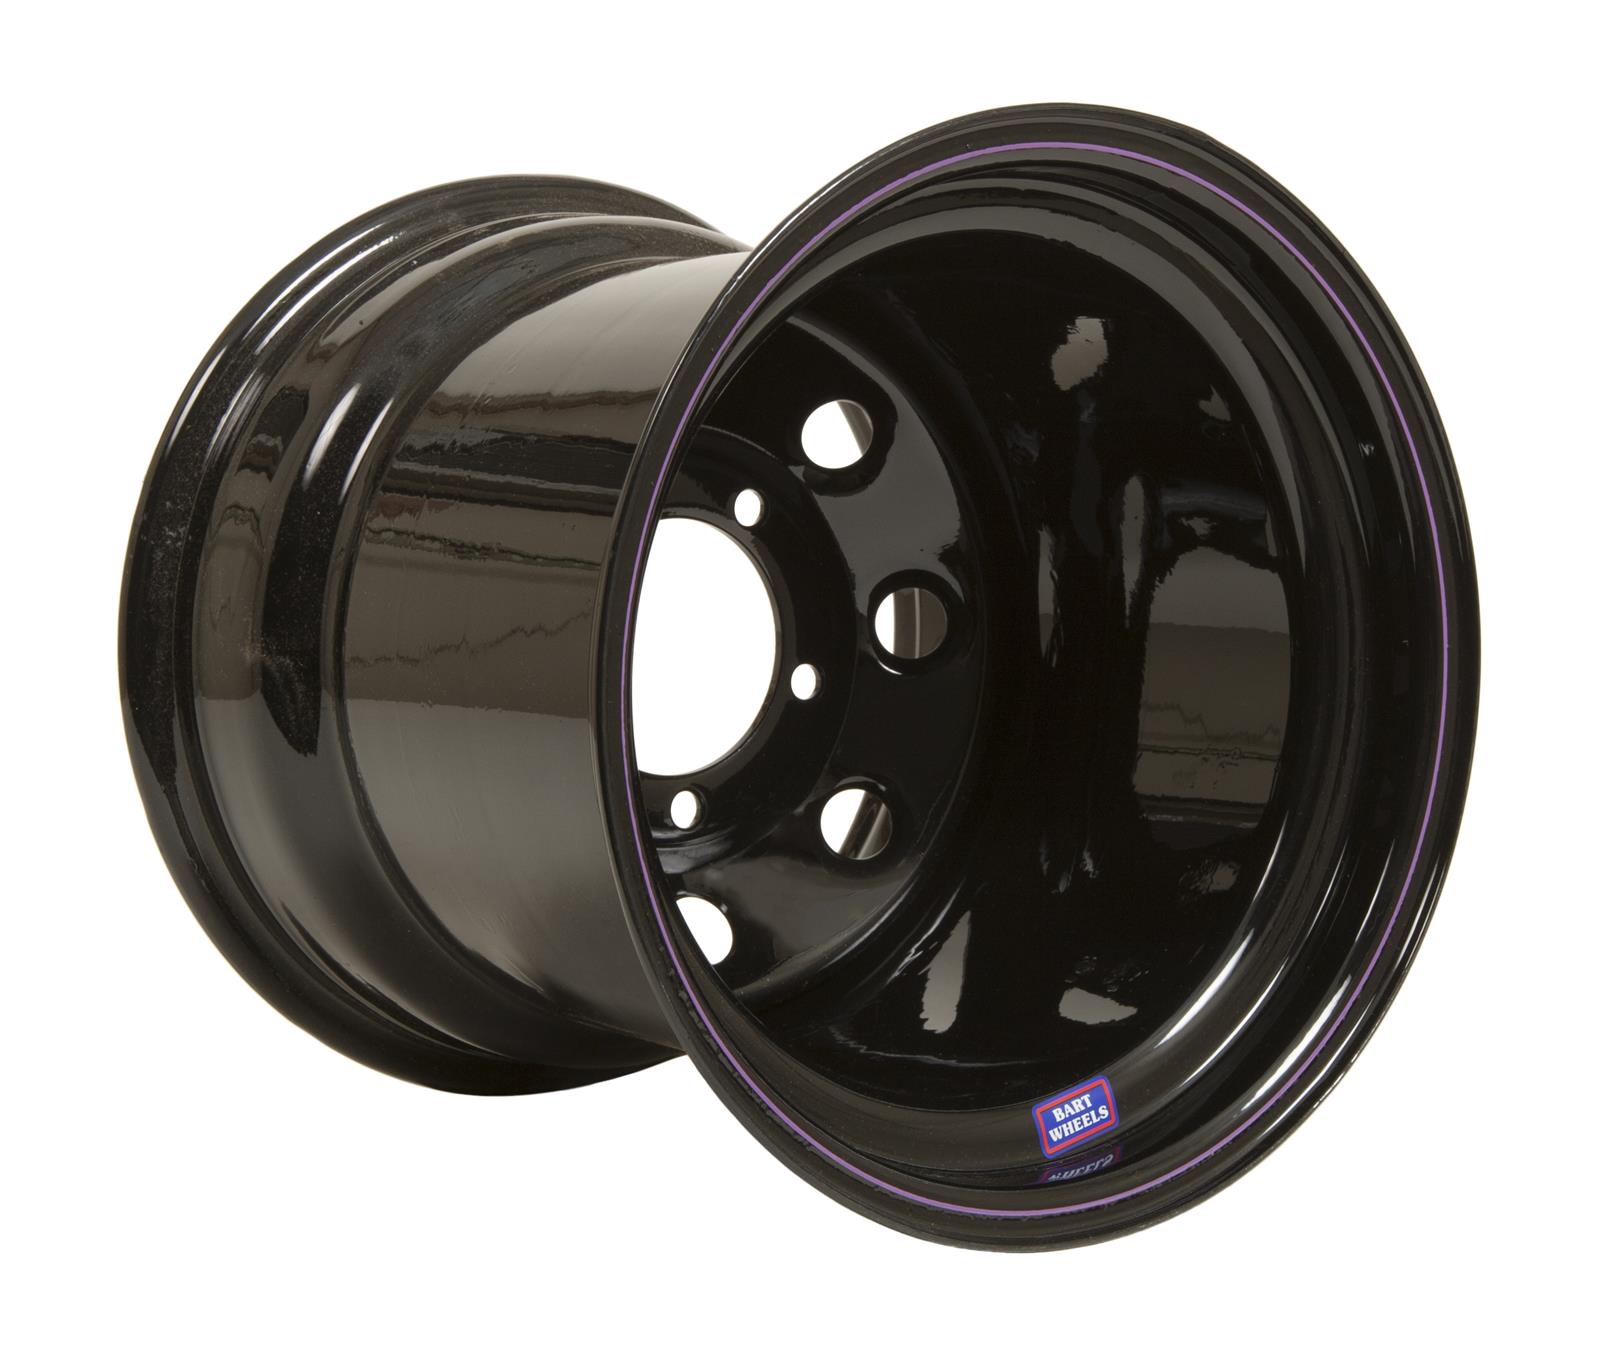 Free Shipping - Bart Wheels 413-5855-5 with qualifying orders of $99. 